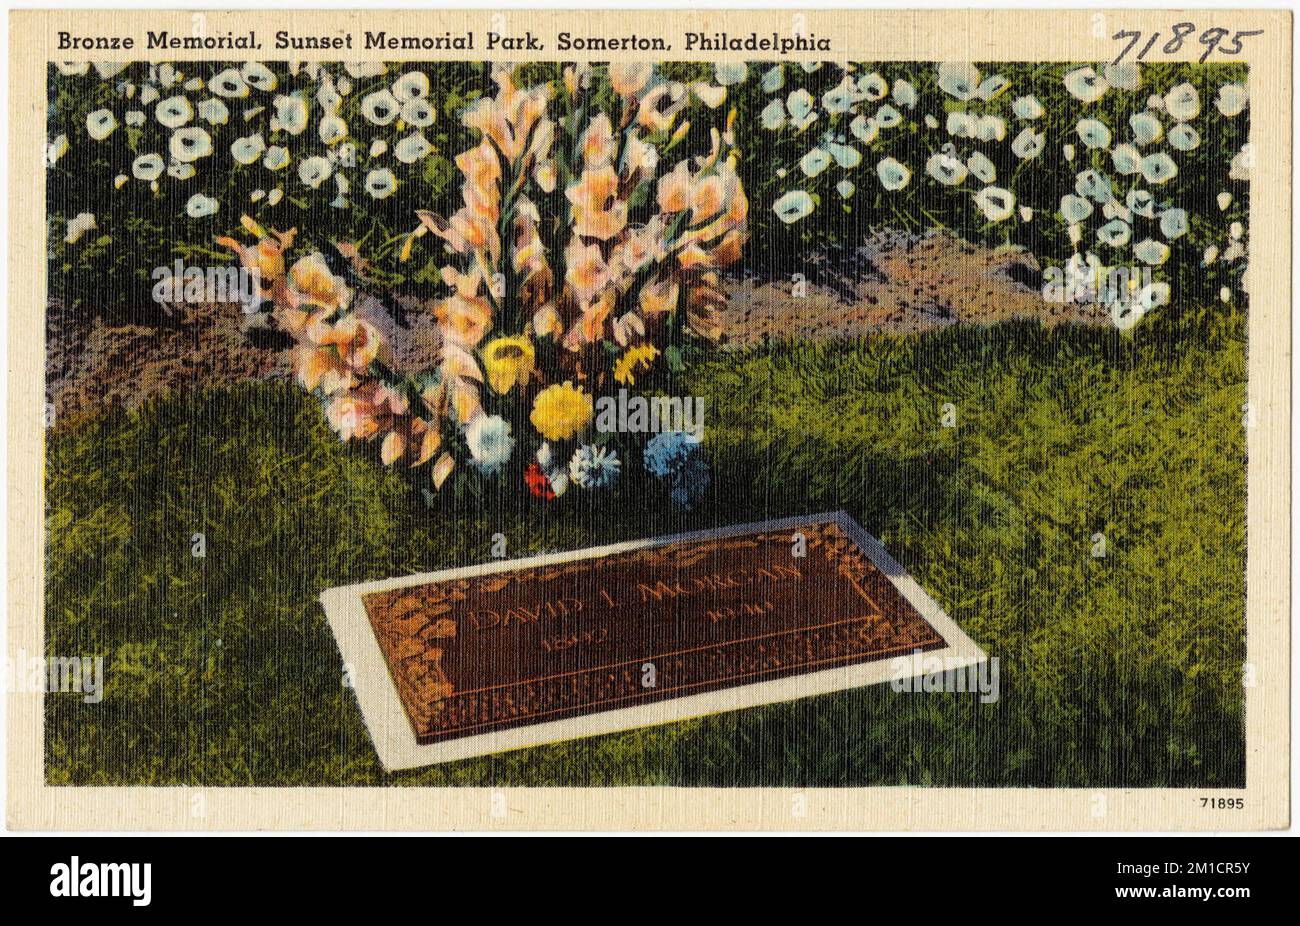 Bronze memorial, Sunset Memorial Park, Somerton, Philadelphia , Parks, Tichnor Brothers Collection, postcards of the United States Stock Photo